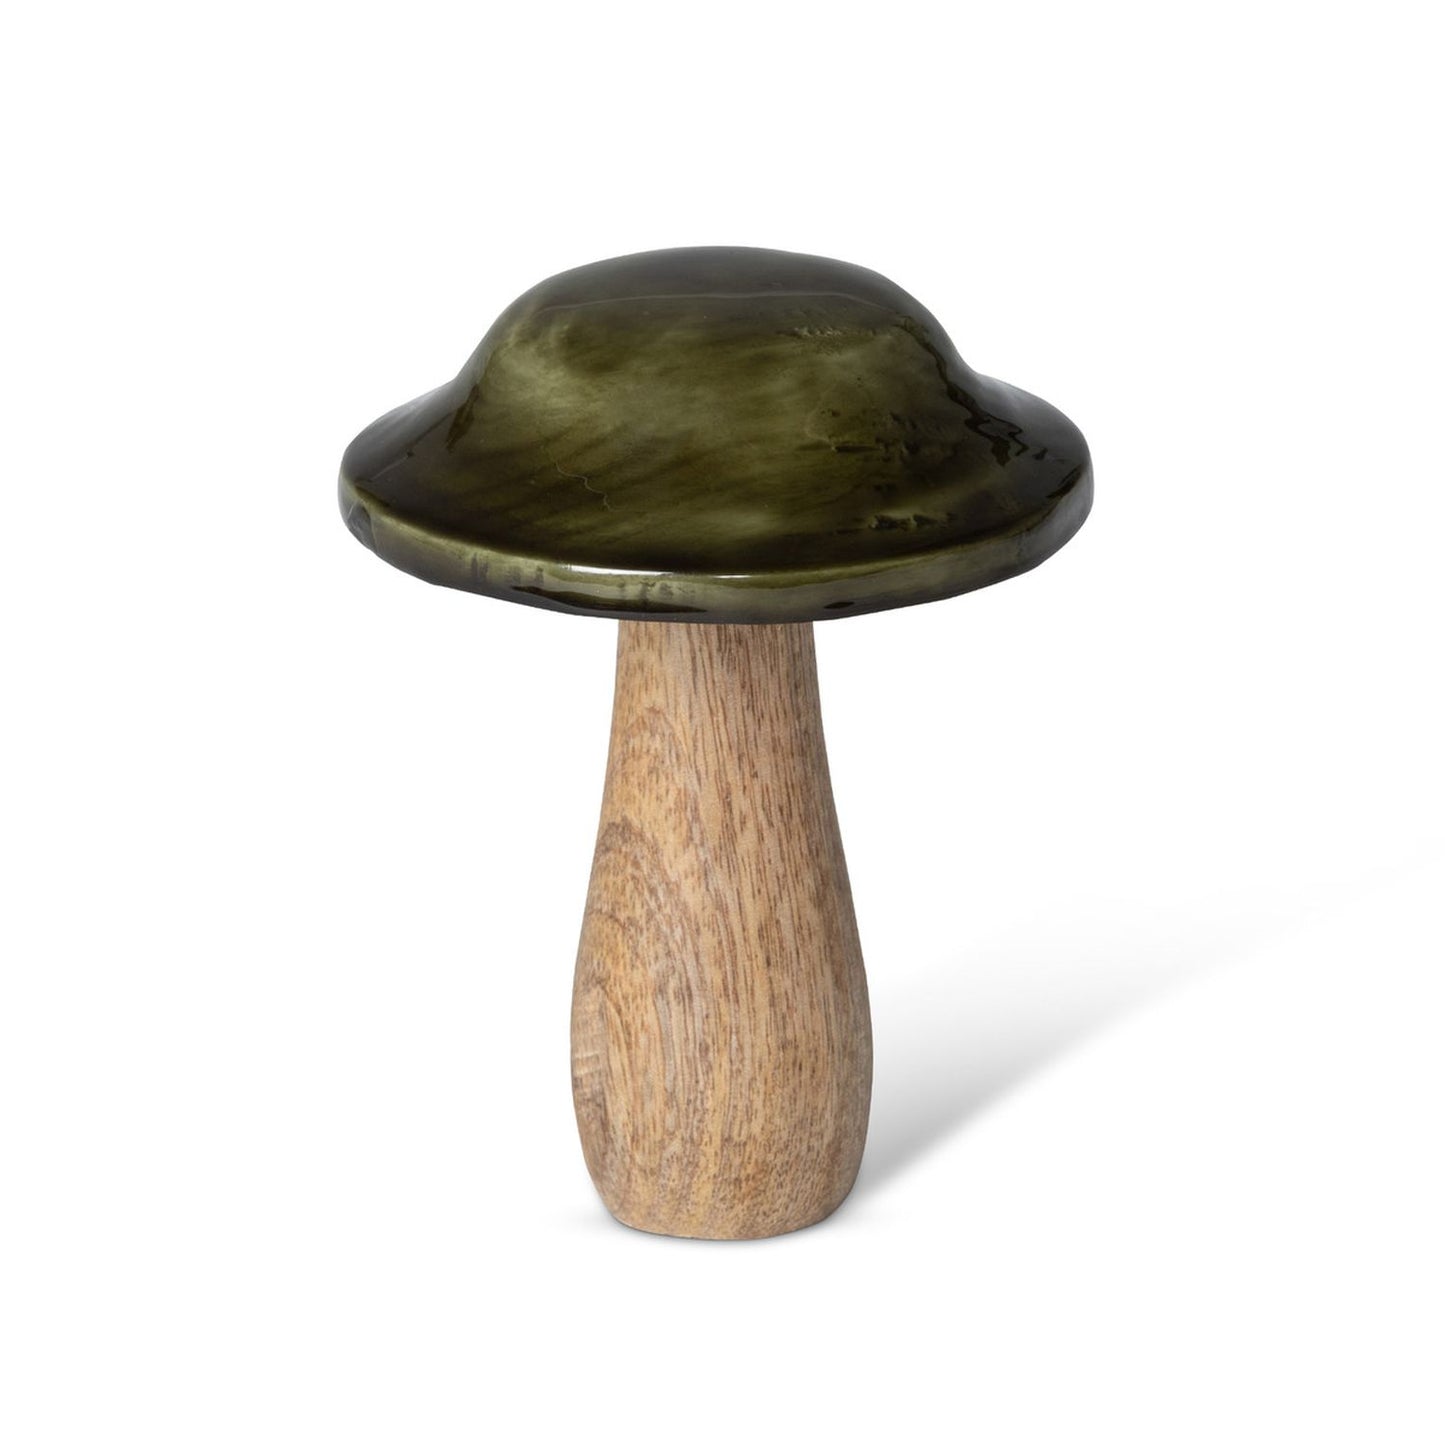 Park Hill Collection Cabin Cozy Forest Green Lacquered Wooden Mushroom